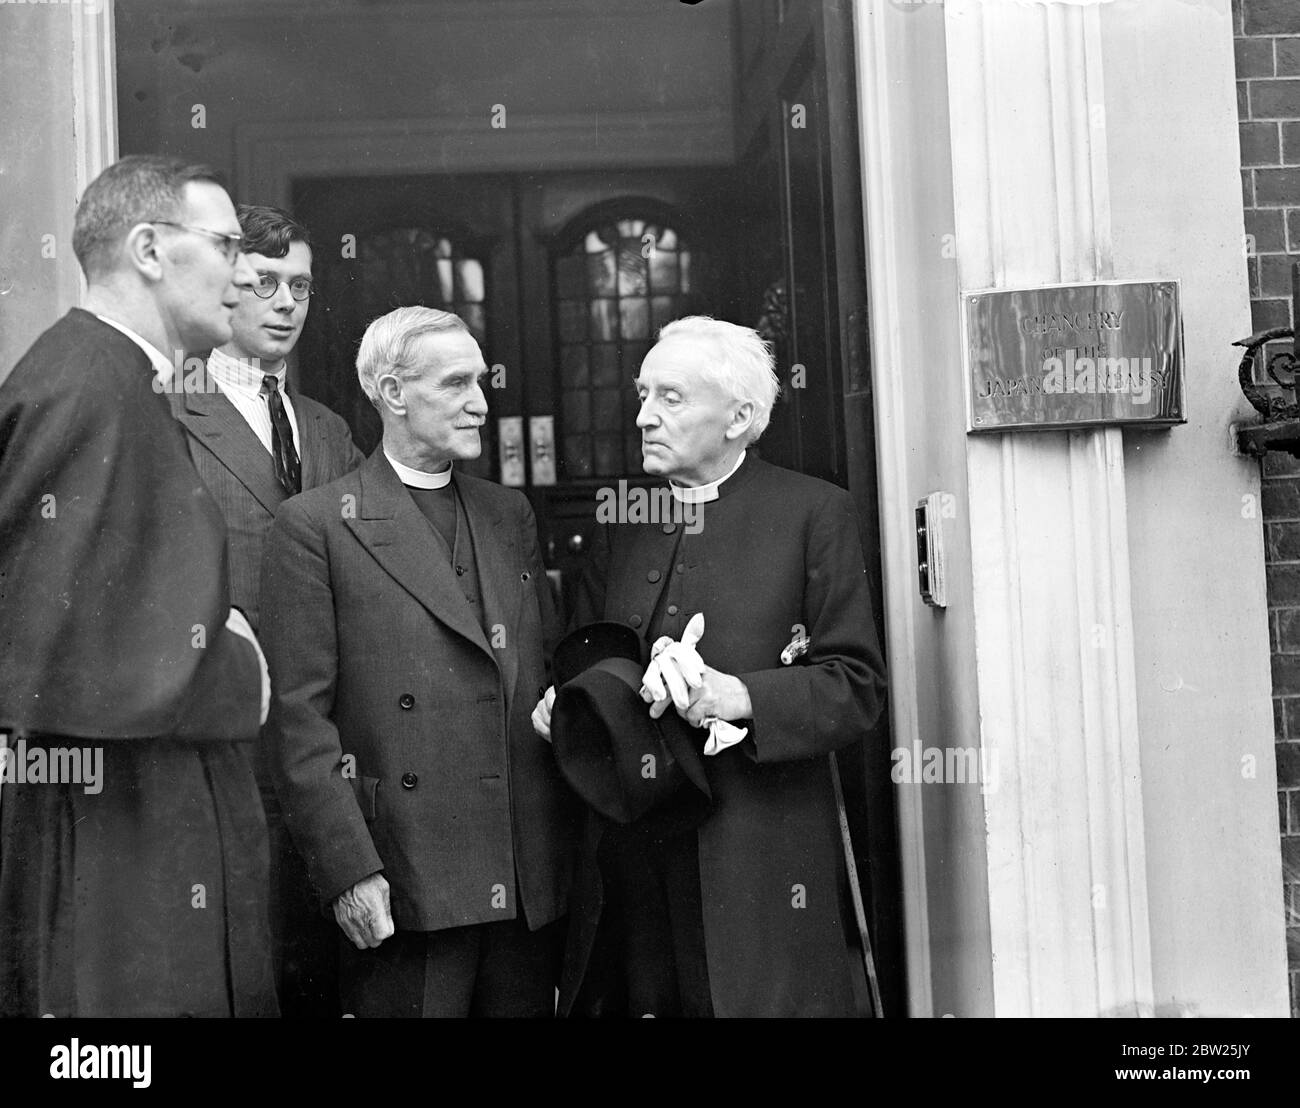 Clergy caller at the Japanese Embassy, protest against Canton bombing. A party of clergy led by the Canon Donaldson called at the Japanese Embassy in Portman Square to protest against the bombing of civilians in Canton. In addition to Canon Donaldson, there were the Rev E J T Bagnall, of the London Free Church Federation, the Rev H Cuthbertson and Mr C D Clagg. The party saw the First Secretary of the Embassy. A further deputation of clergy representing various denominations is to call at the embassy in a fortnight. Photo shows, lRev H Cuthbertson (right), talking with the Rev E J T Bagnall , Stock Photo